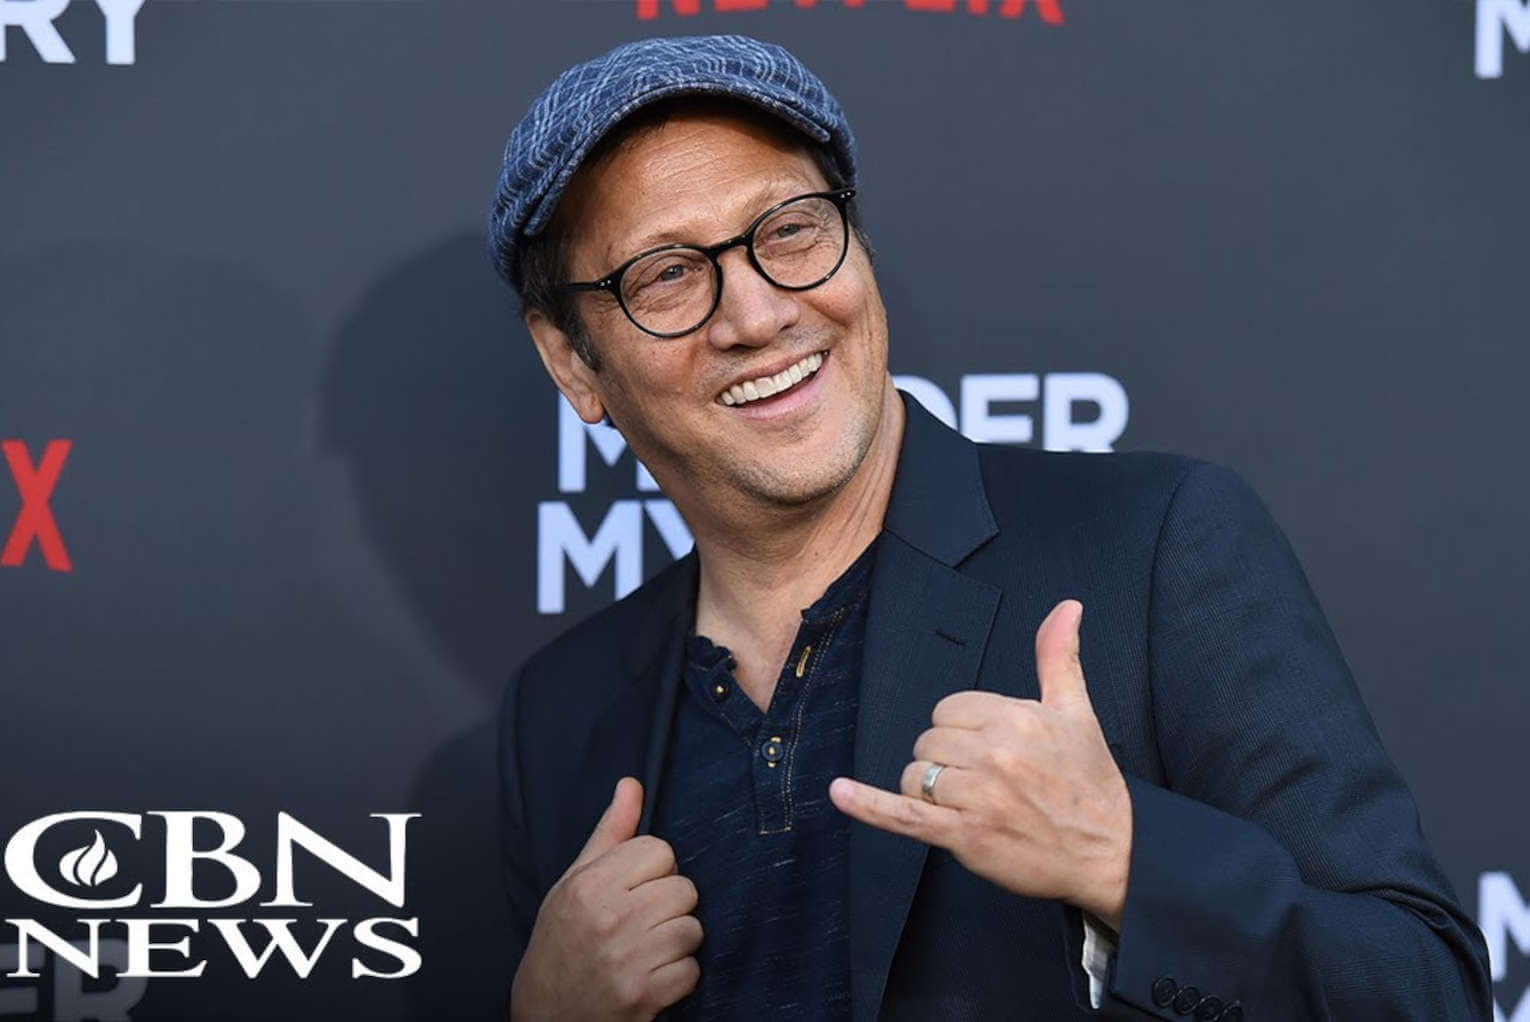 ‘I Saw Organized Evil’: Actor Rob Schneider on Fear, Coercion and a Failure to Follow ‘Science’